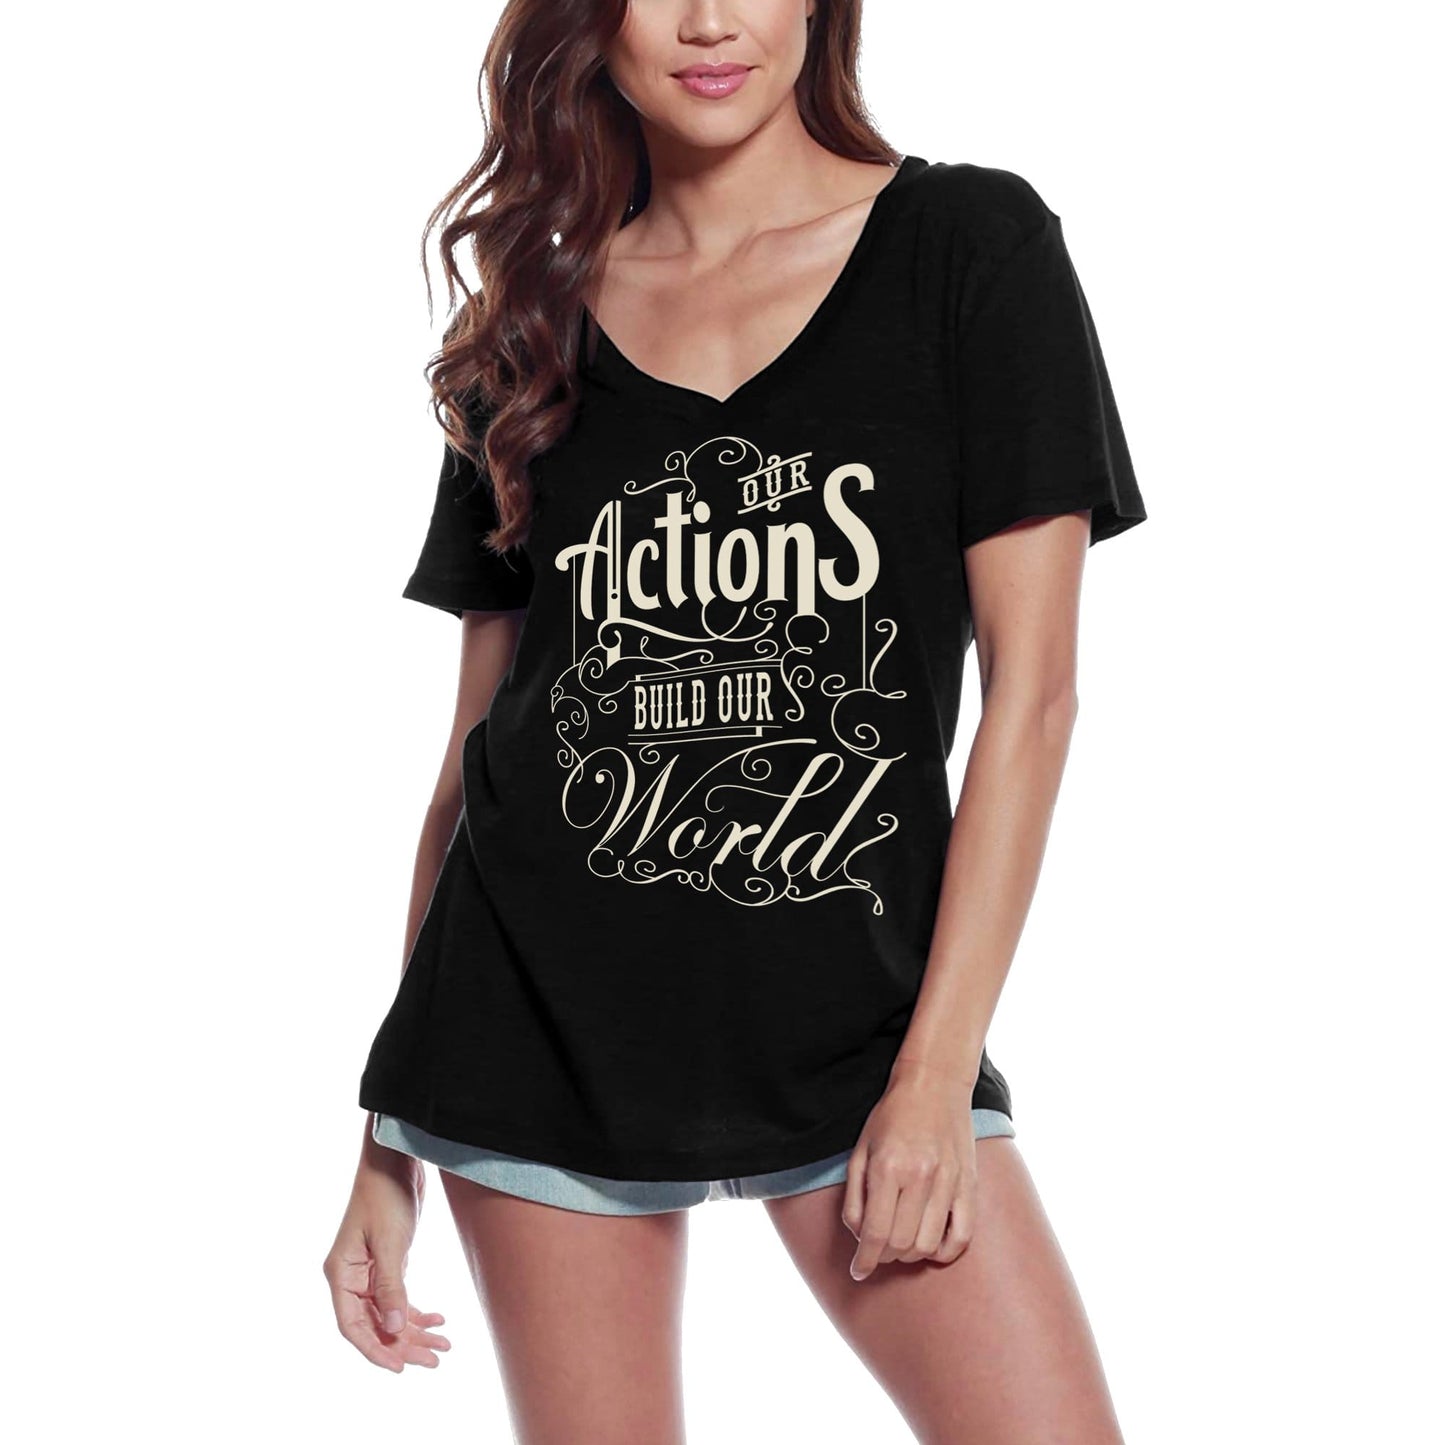 ULTRABASIC Women's T-Shirt Our Action Build Our World - Motivational Slogan Tee